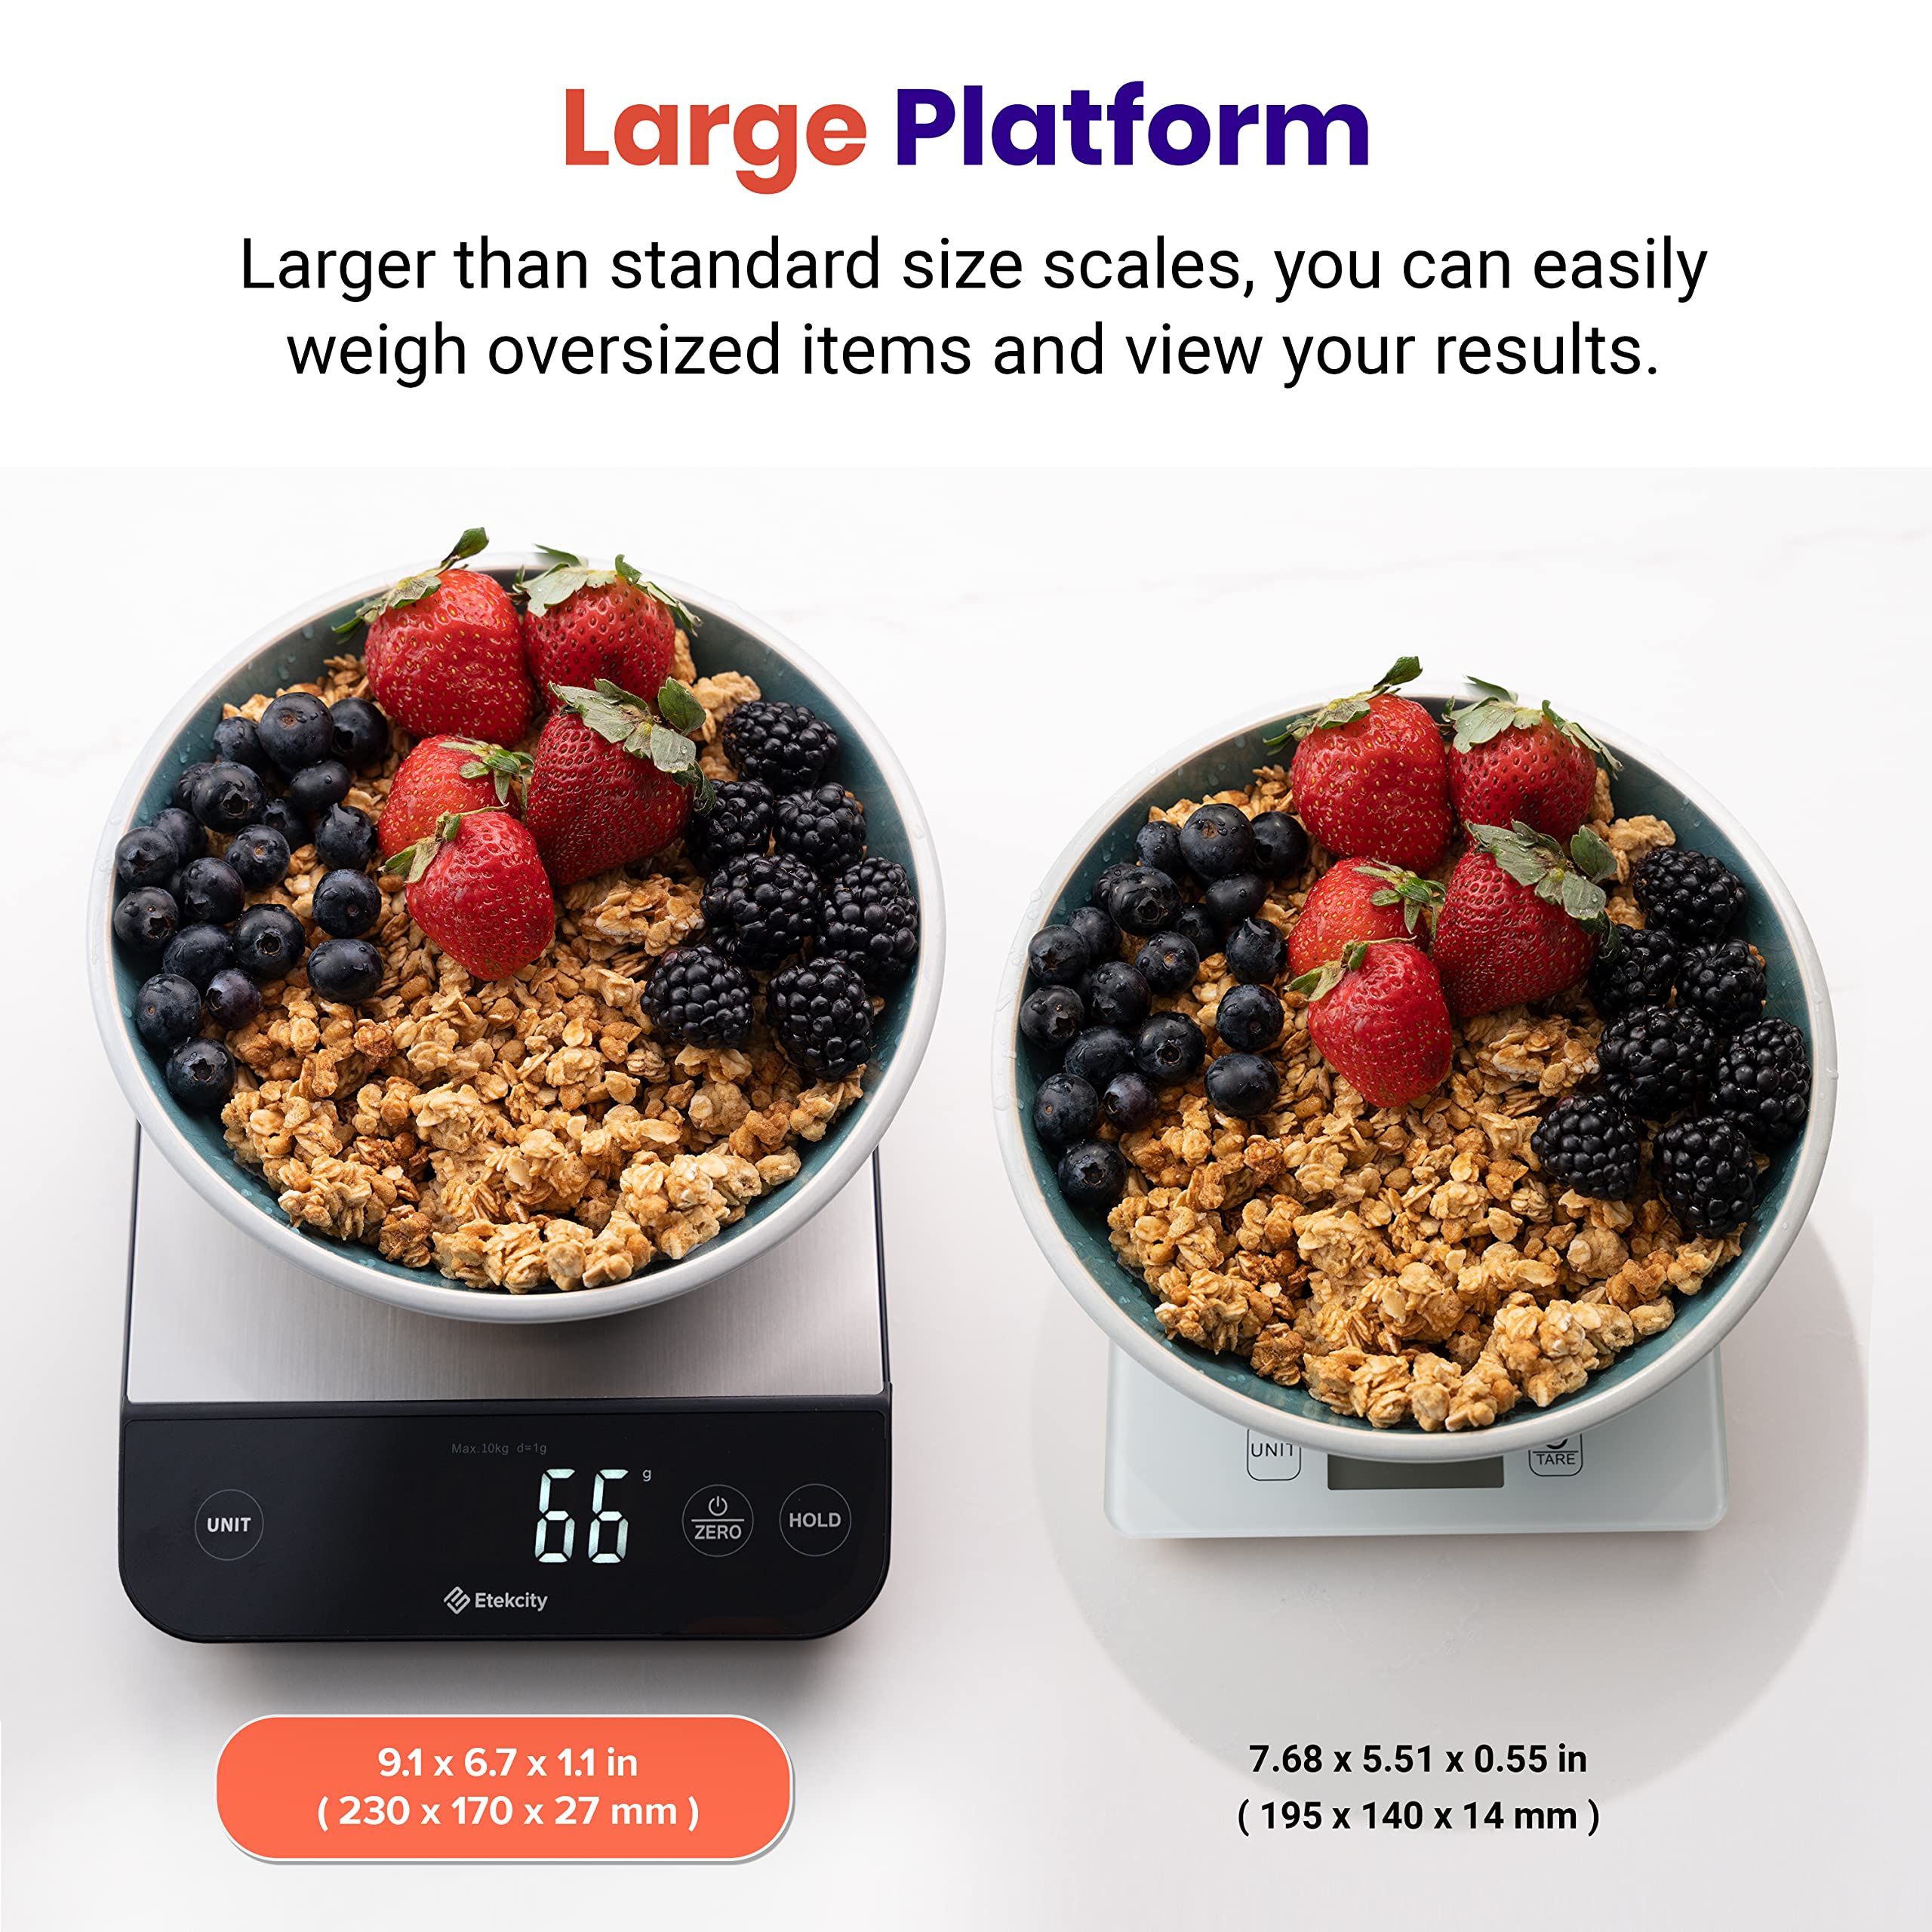 Etekcity Food Kitchen Scale 22lb, Digital Weight Grams and Oz for Weight Loss, Baking and Cooking, 0.05oz/1g Precise Graduation,5 Weight Units, IPX6 Waterproof, USB Rechargeable,304 Stainless Steel